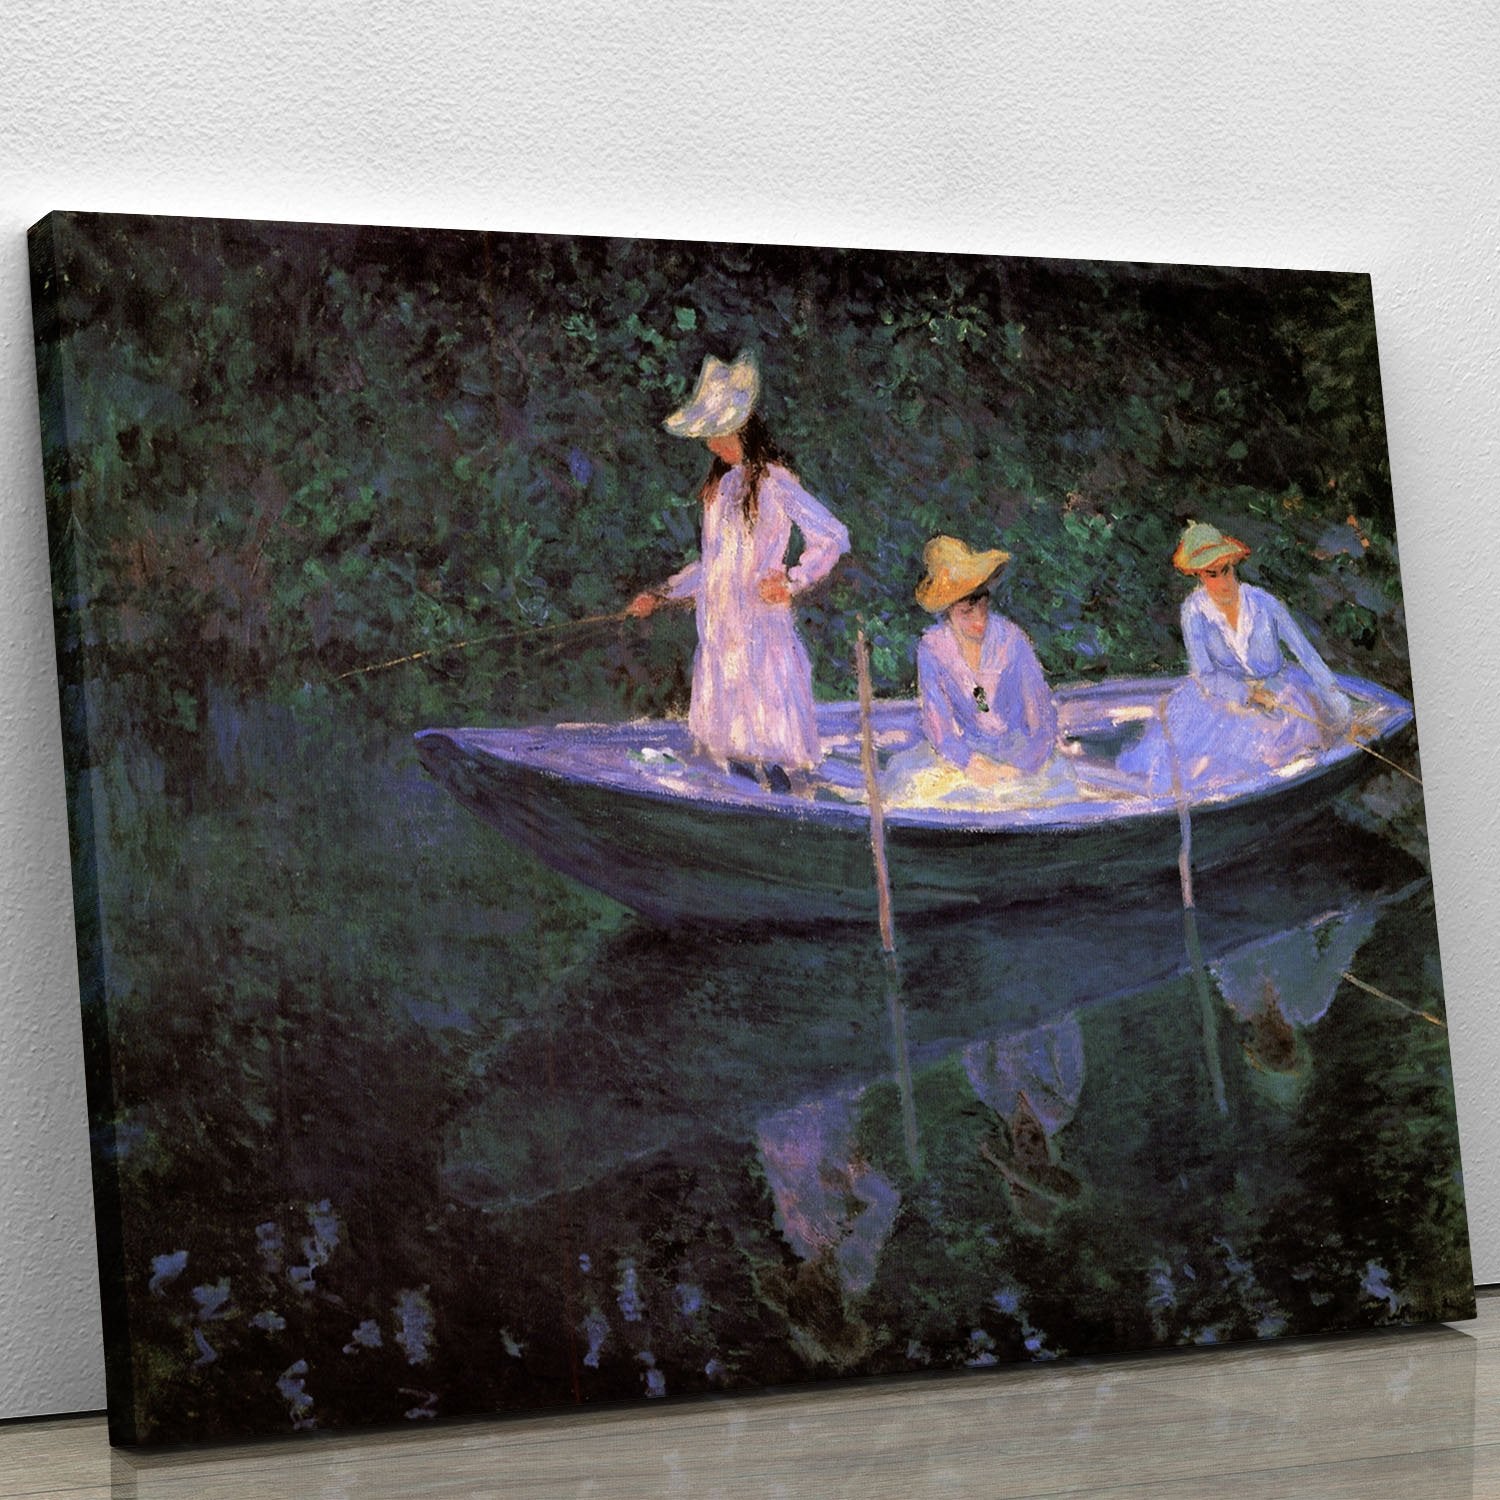 La Barque at Giverny by Monet Canvas Print or Poster